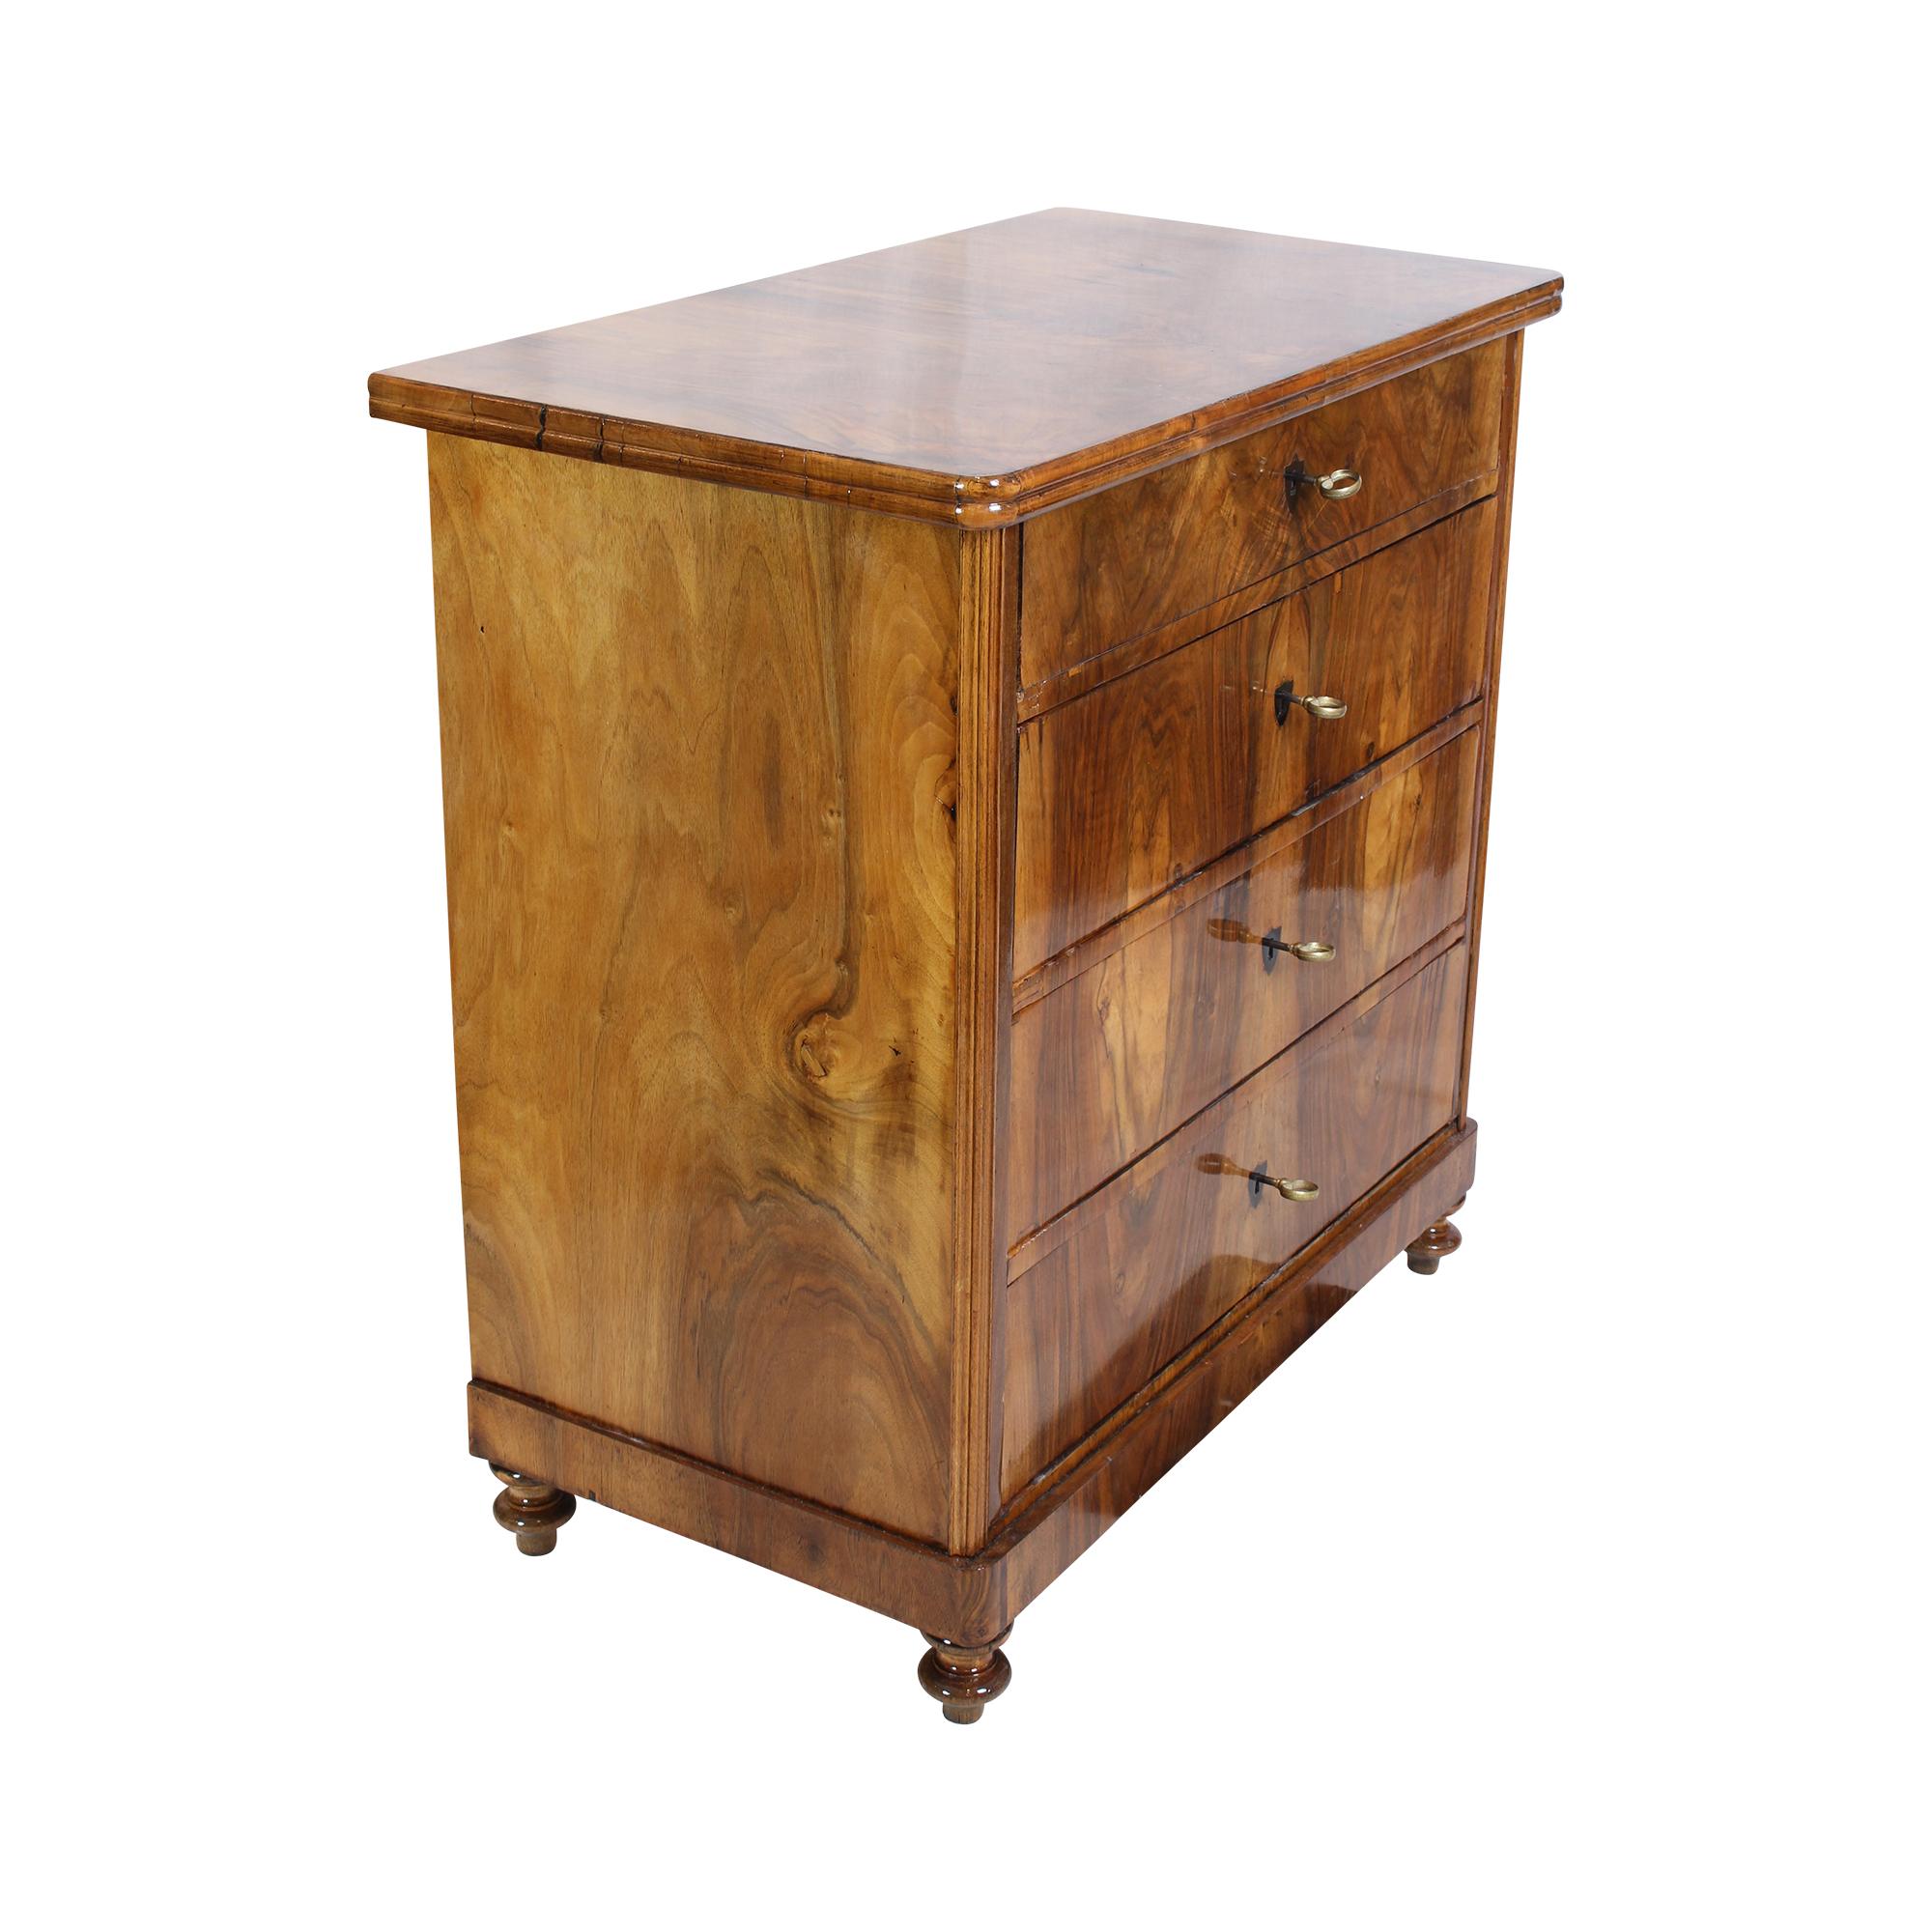 Beautiful narrow/not so large Biedermeier chest of drawers from around 1830. The chest of drawers has four drawers and a very beautiful walnut veneer. The chest of drawers comes from Mainz from the manufactory of Franz Xaver Riffel, as can be seen